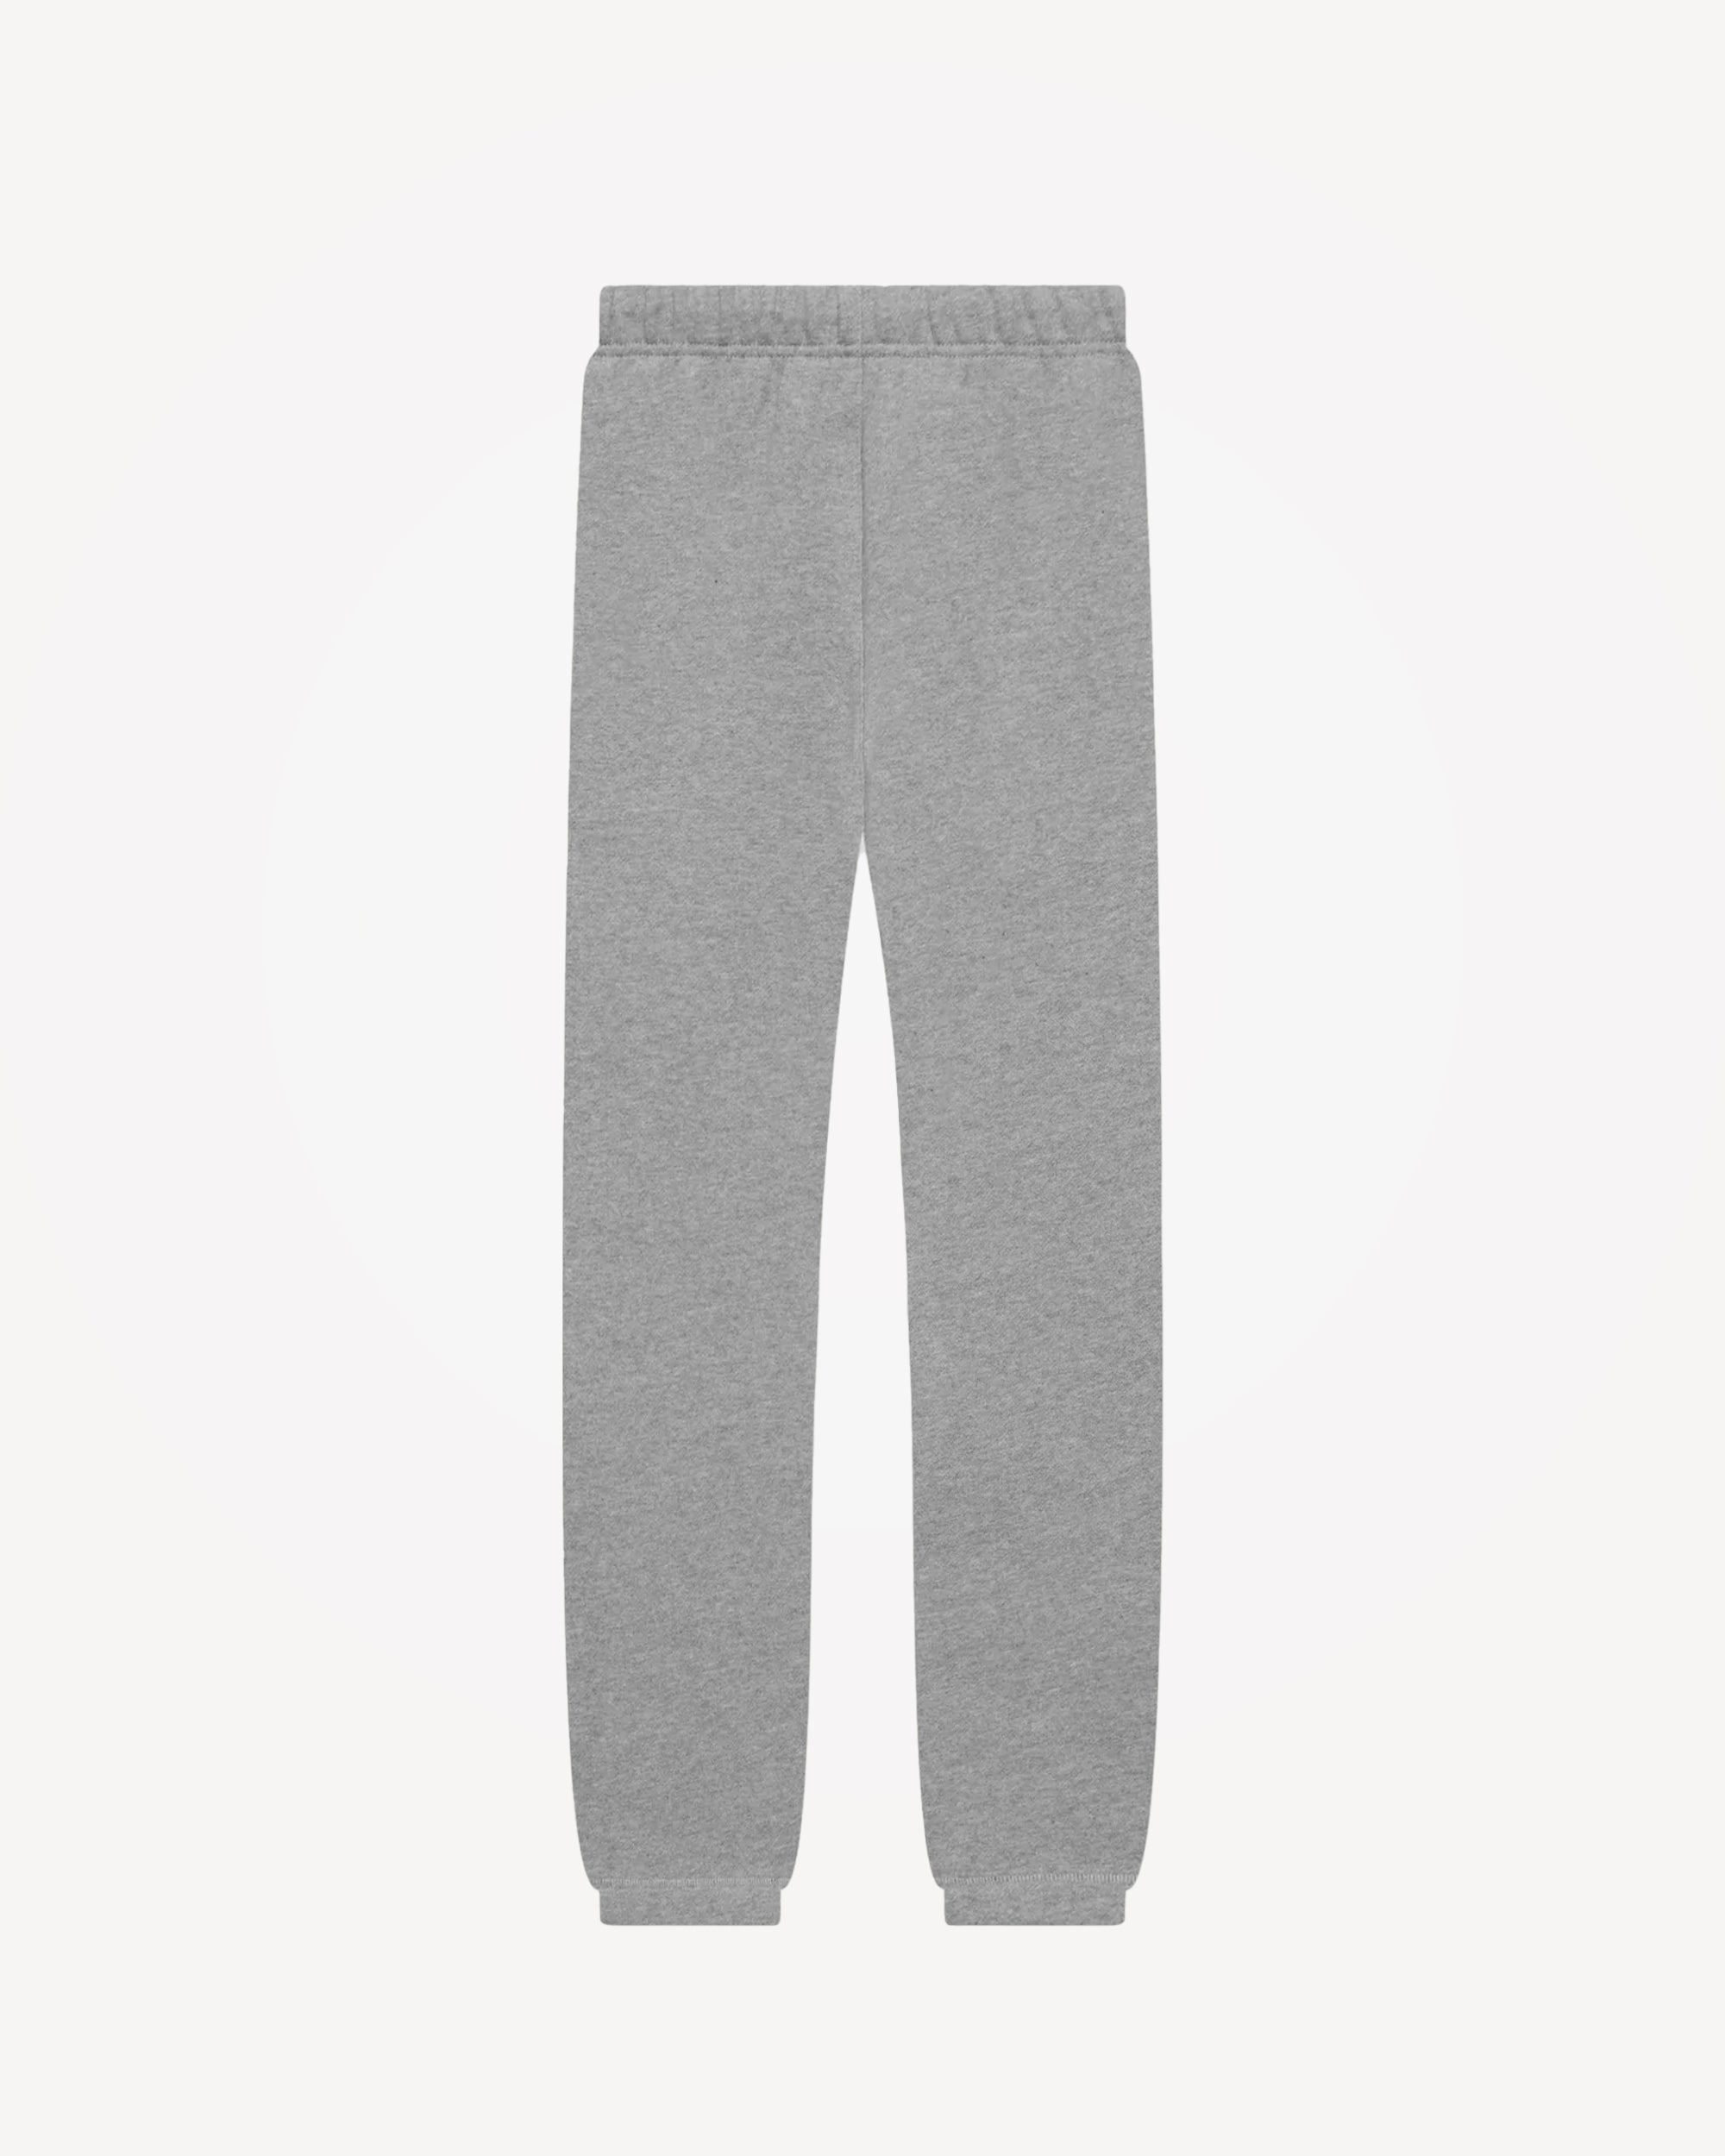 Kids' Core Collection Sweatpants in Dark Oatmeal